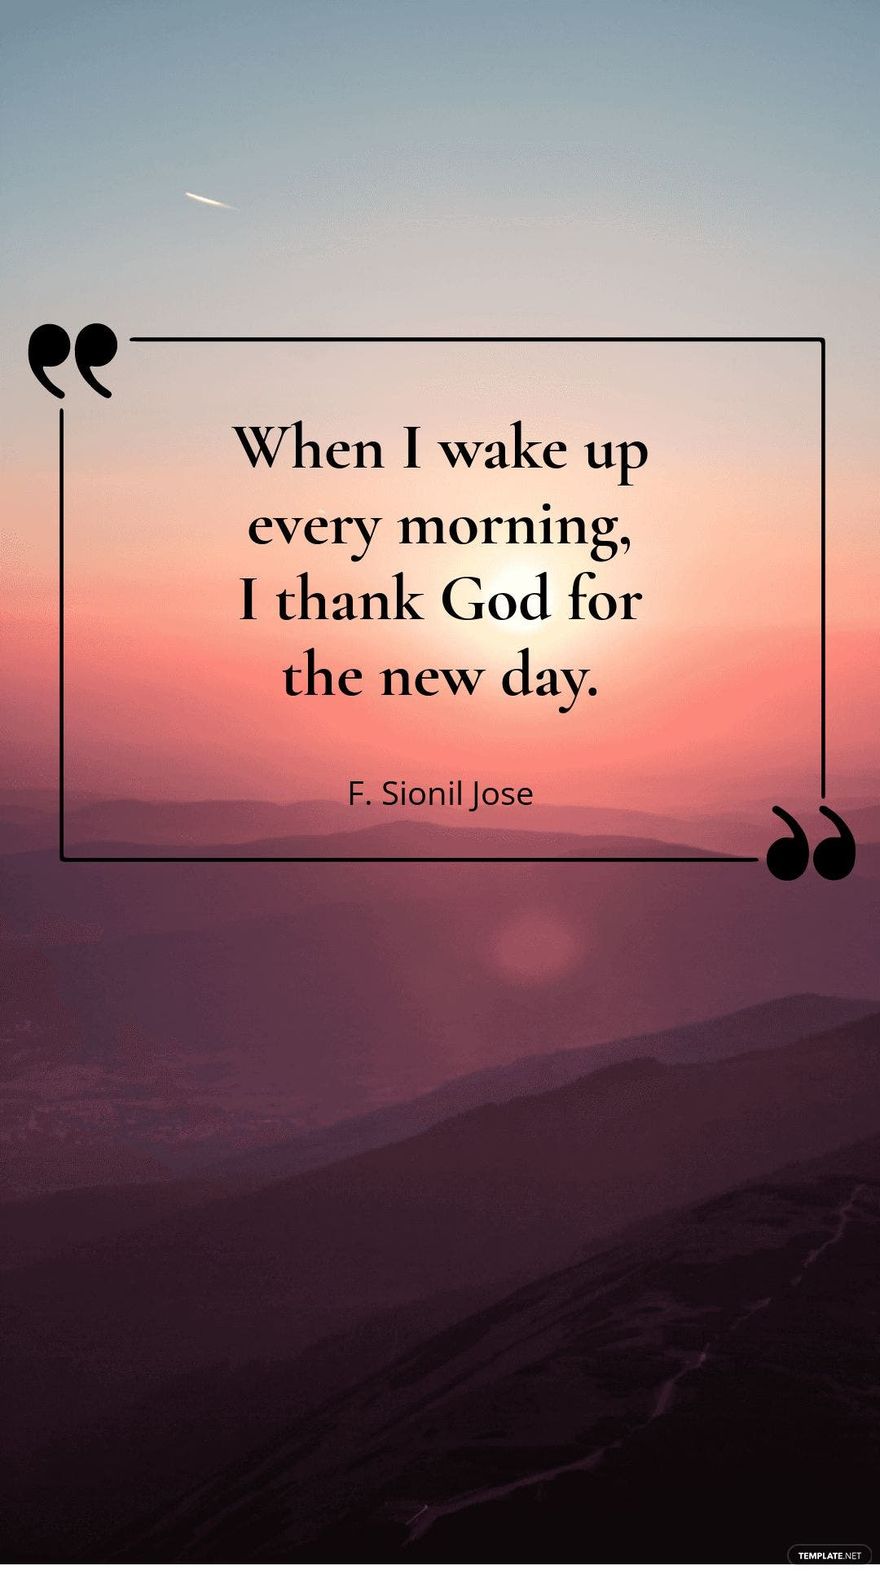 F. Sionil Jose - When I wake up every morning, I thank God for the new day.